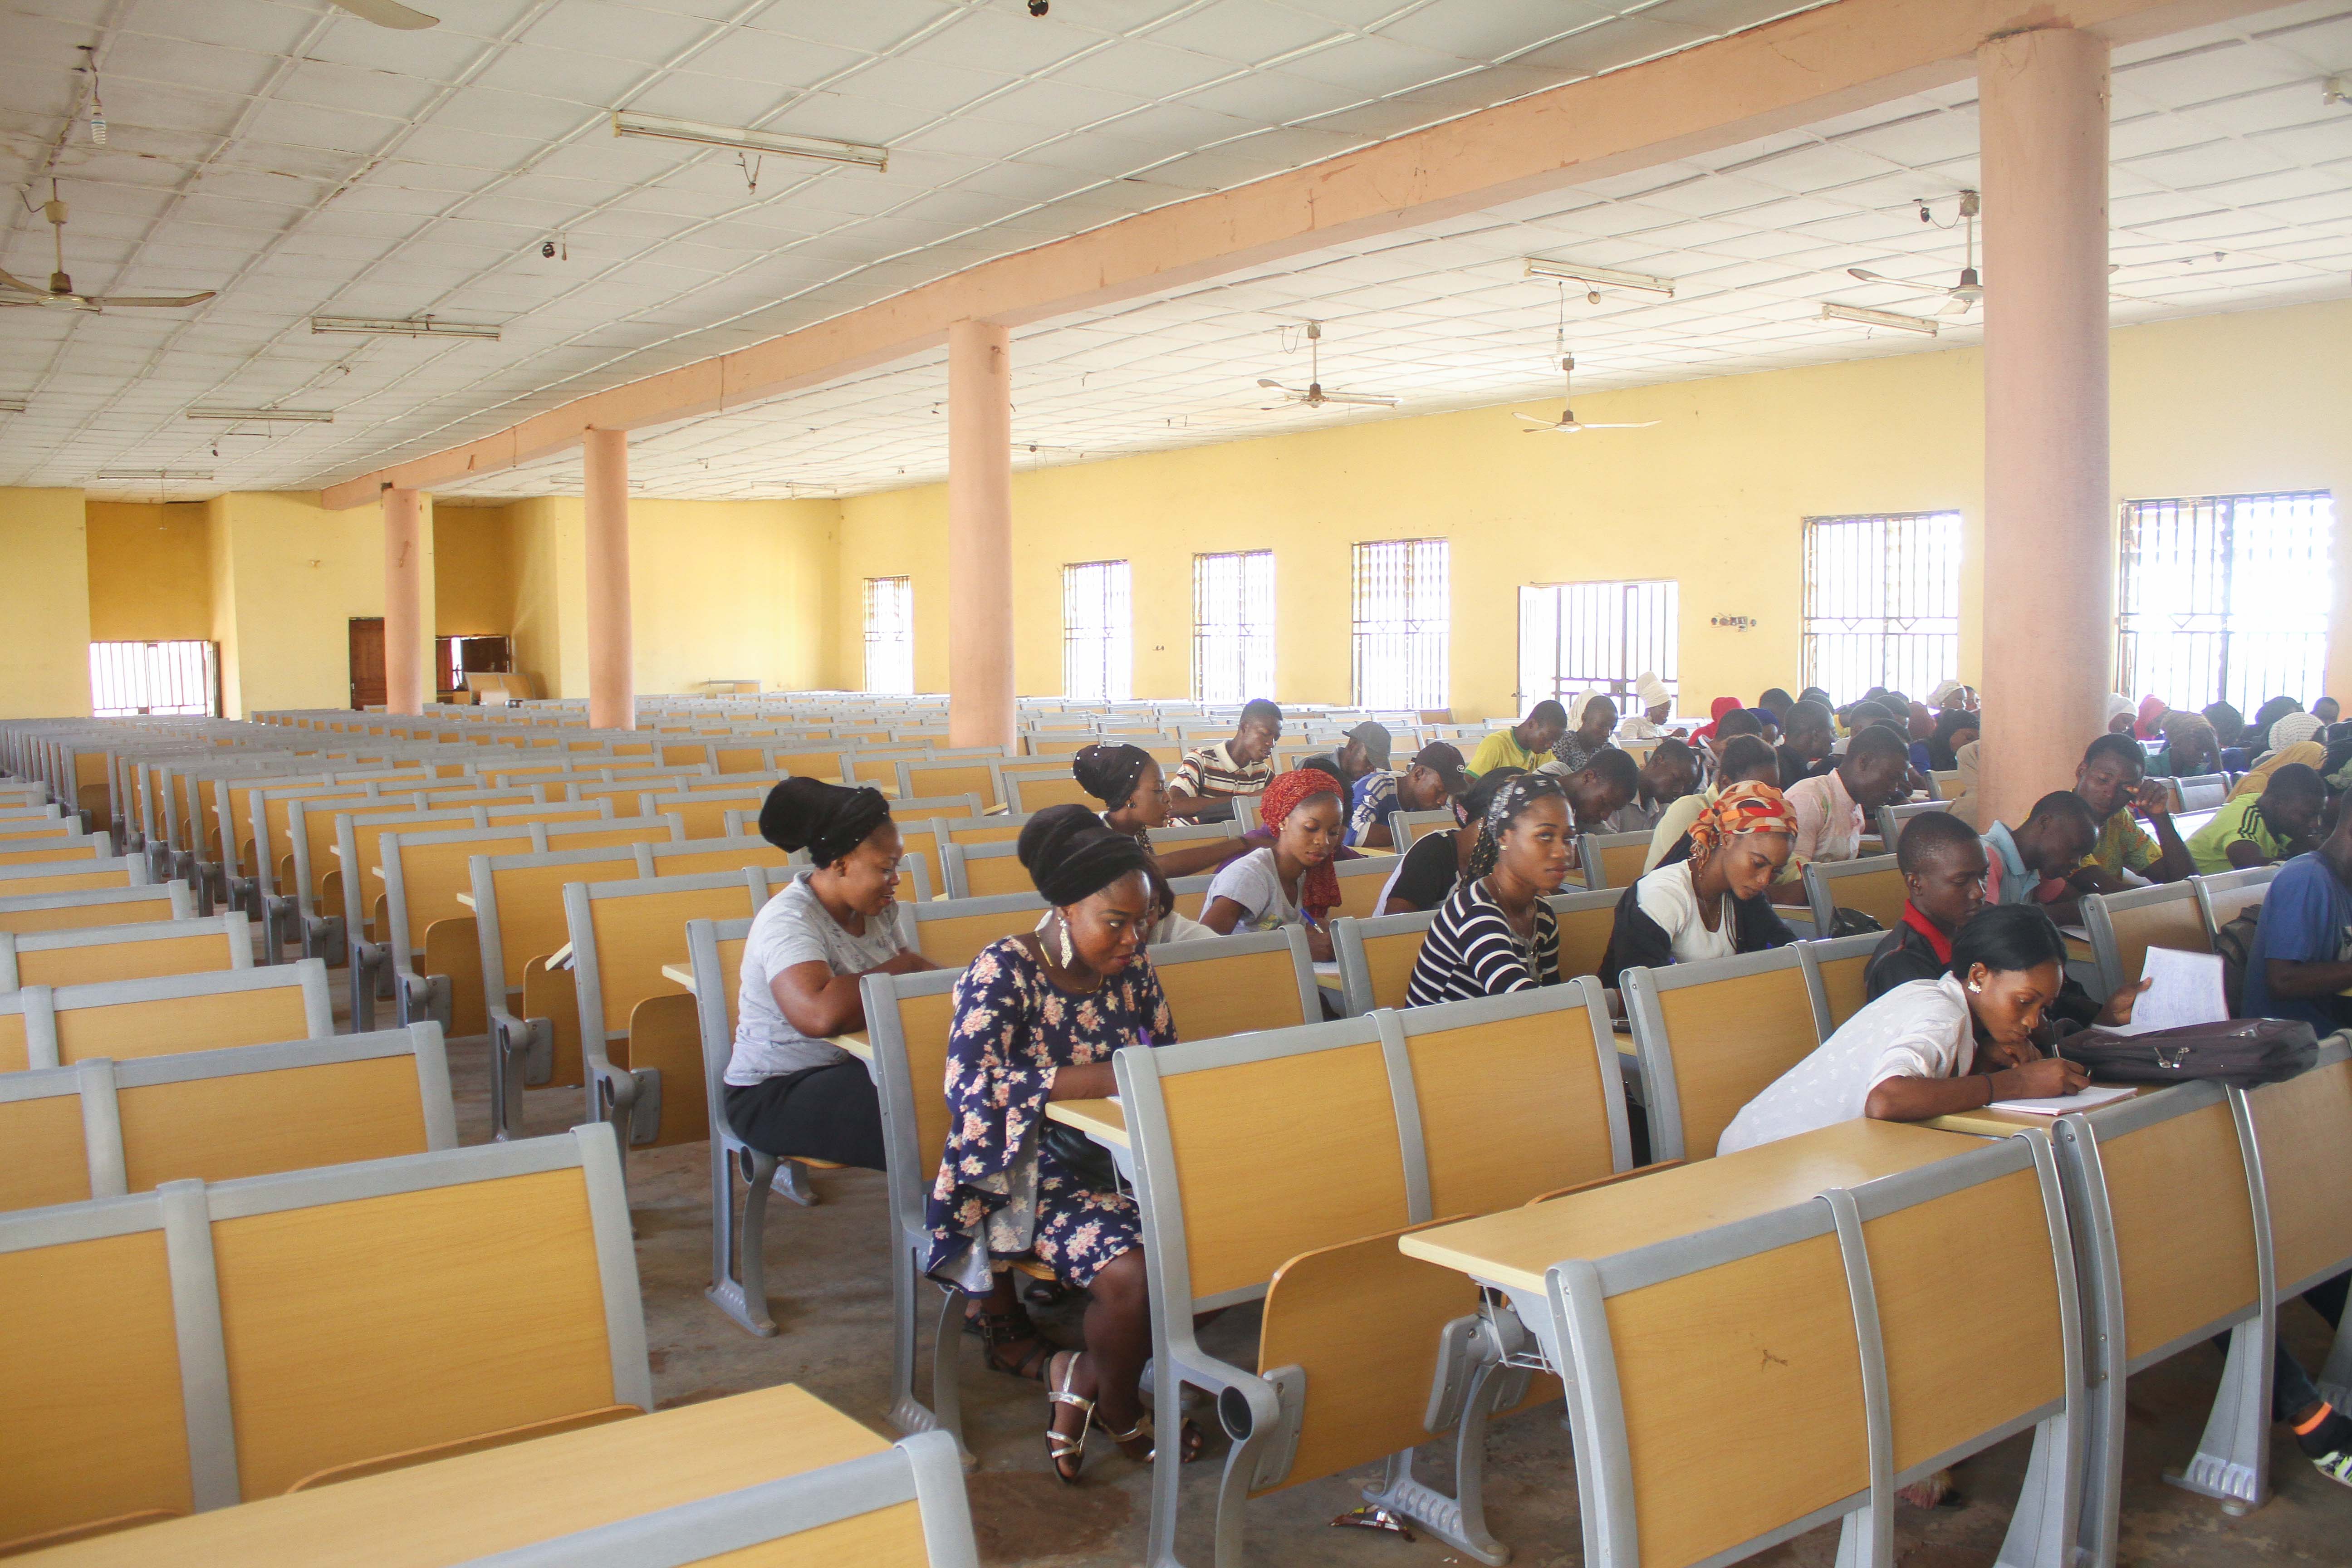 Students receiving lecture inside the Lecture Hall